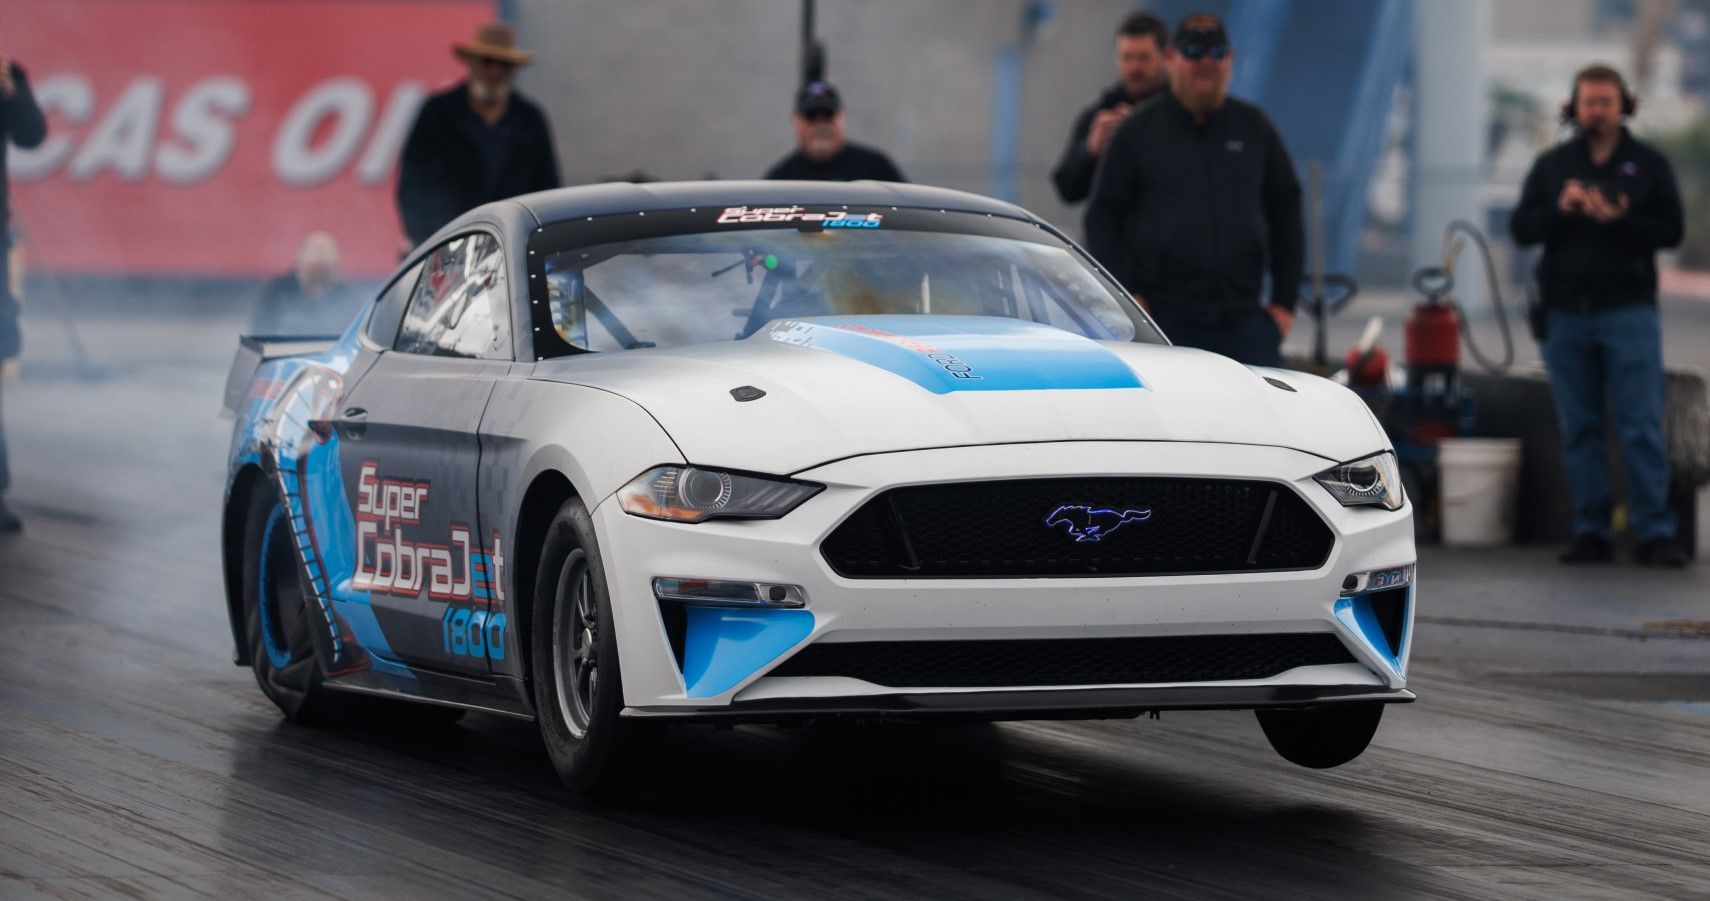 1800-HP Ford Mustang Super Cobra Jet popping a wheelie